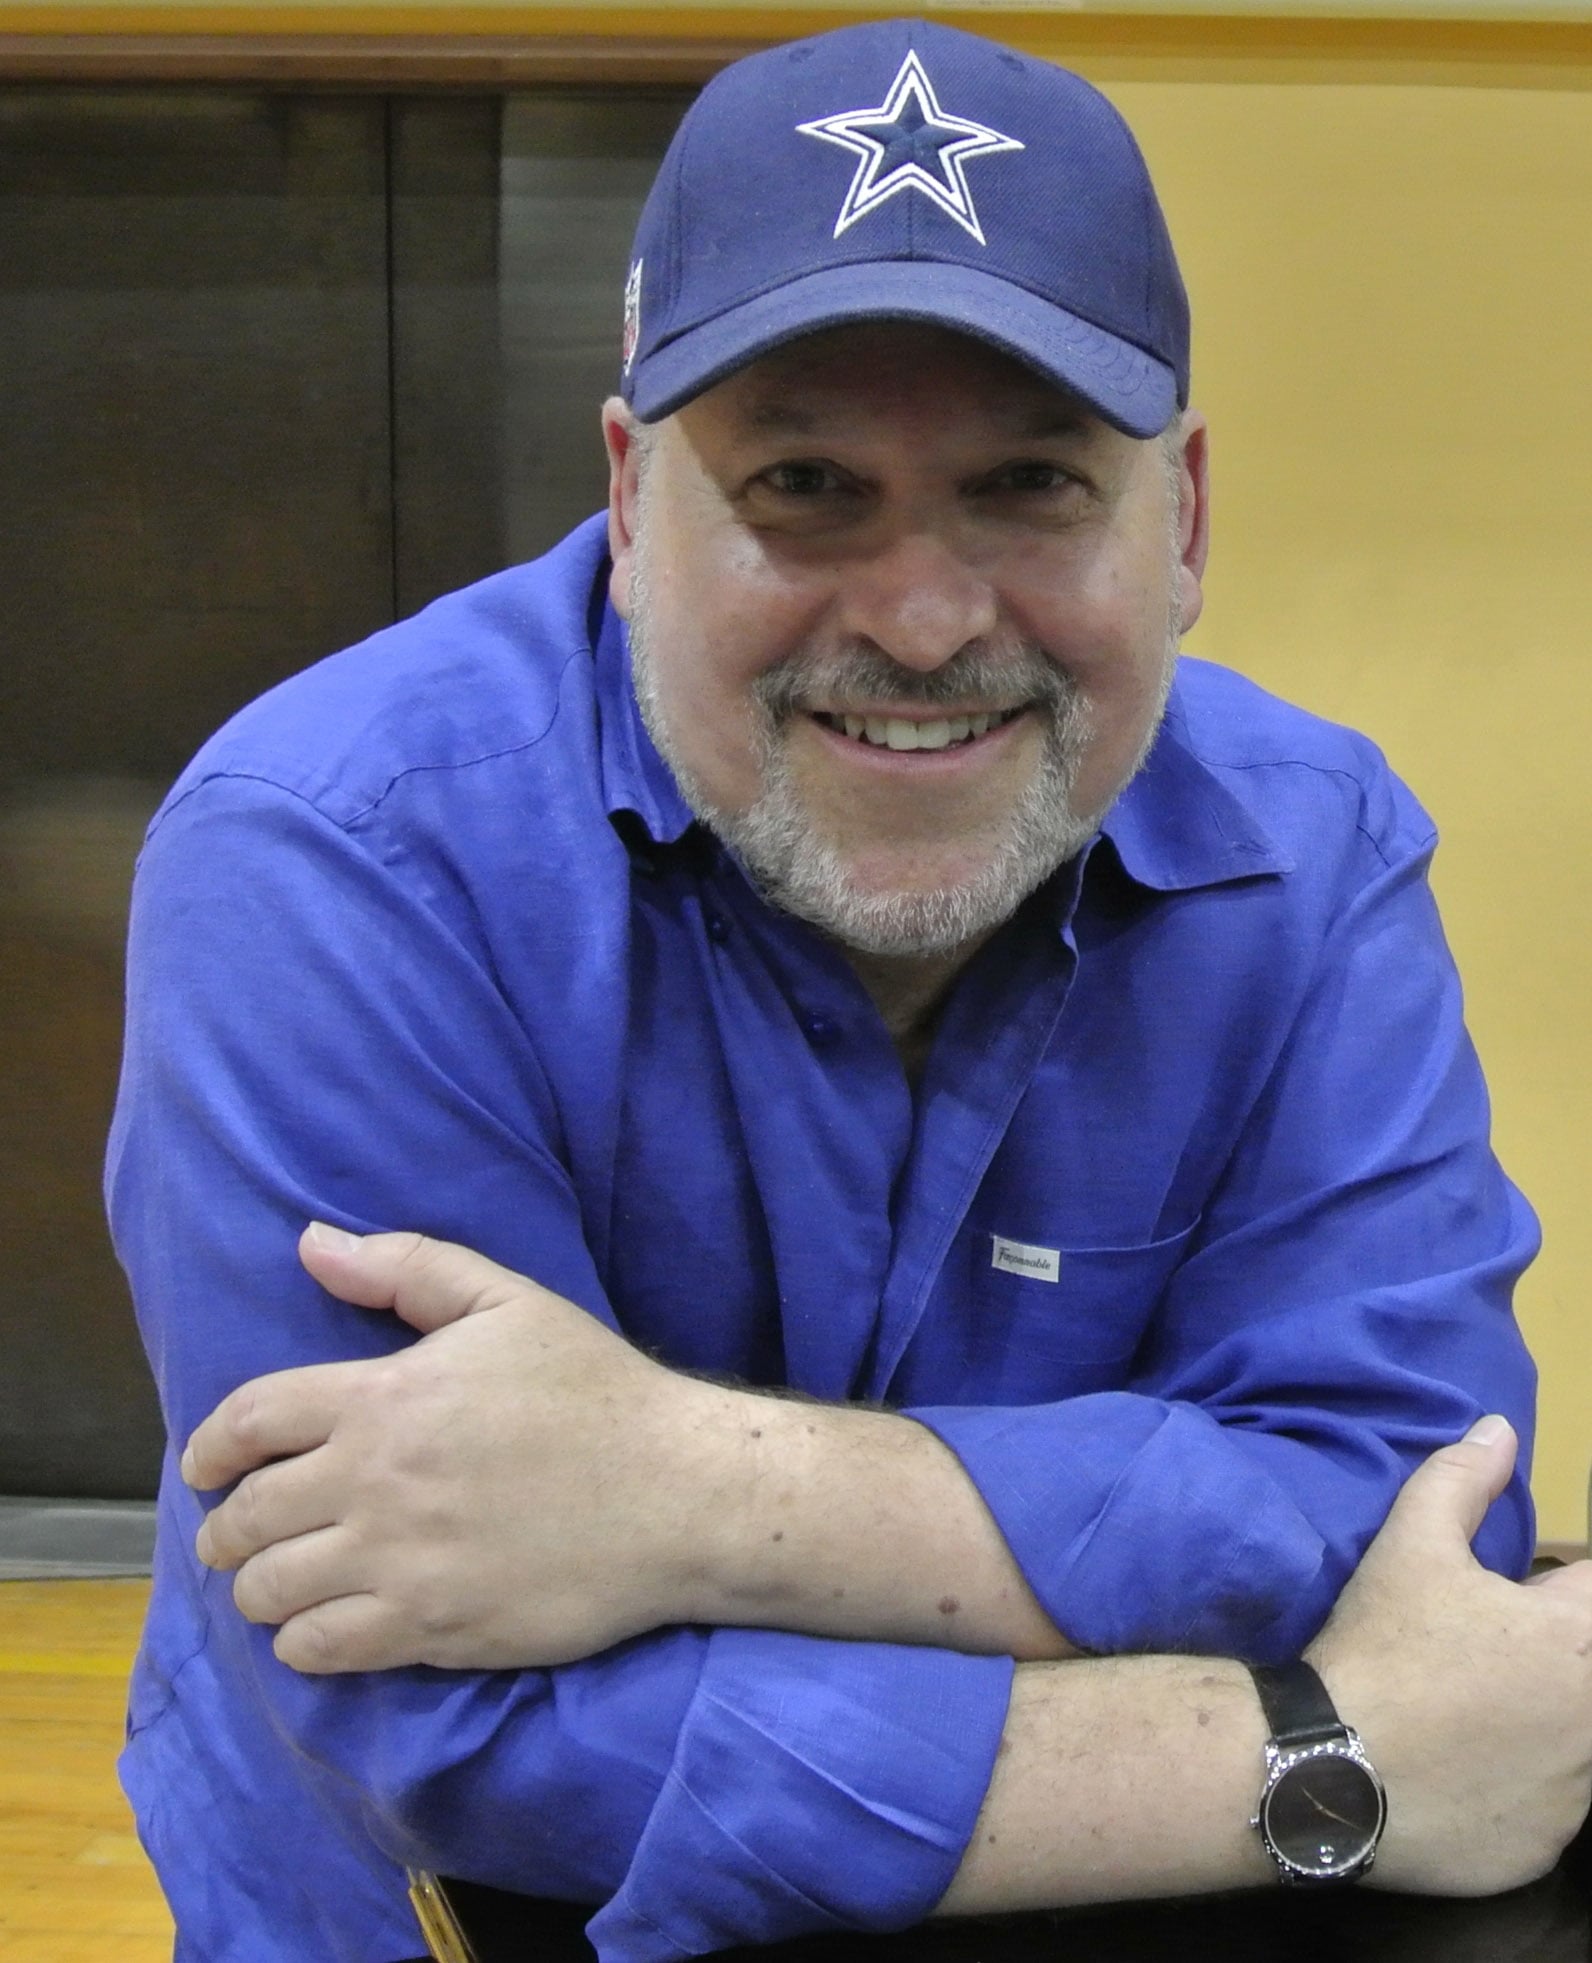 Frank Wildhorn was captured in a smiley face wearing blue cap and blue shirt with a smile face and folding his hand